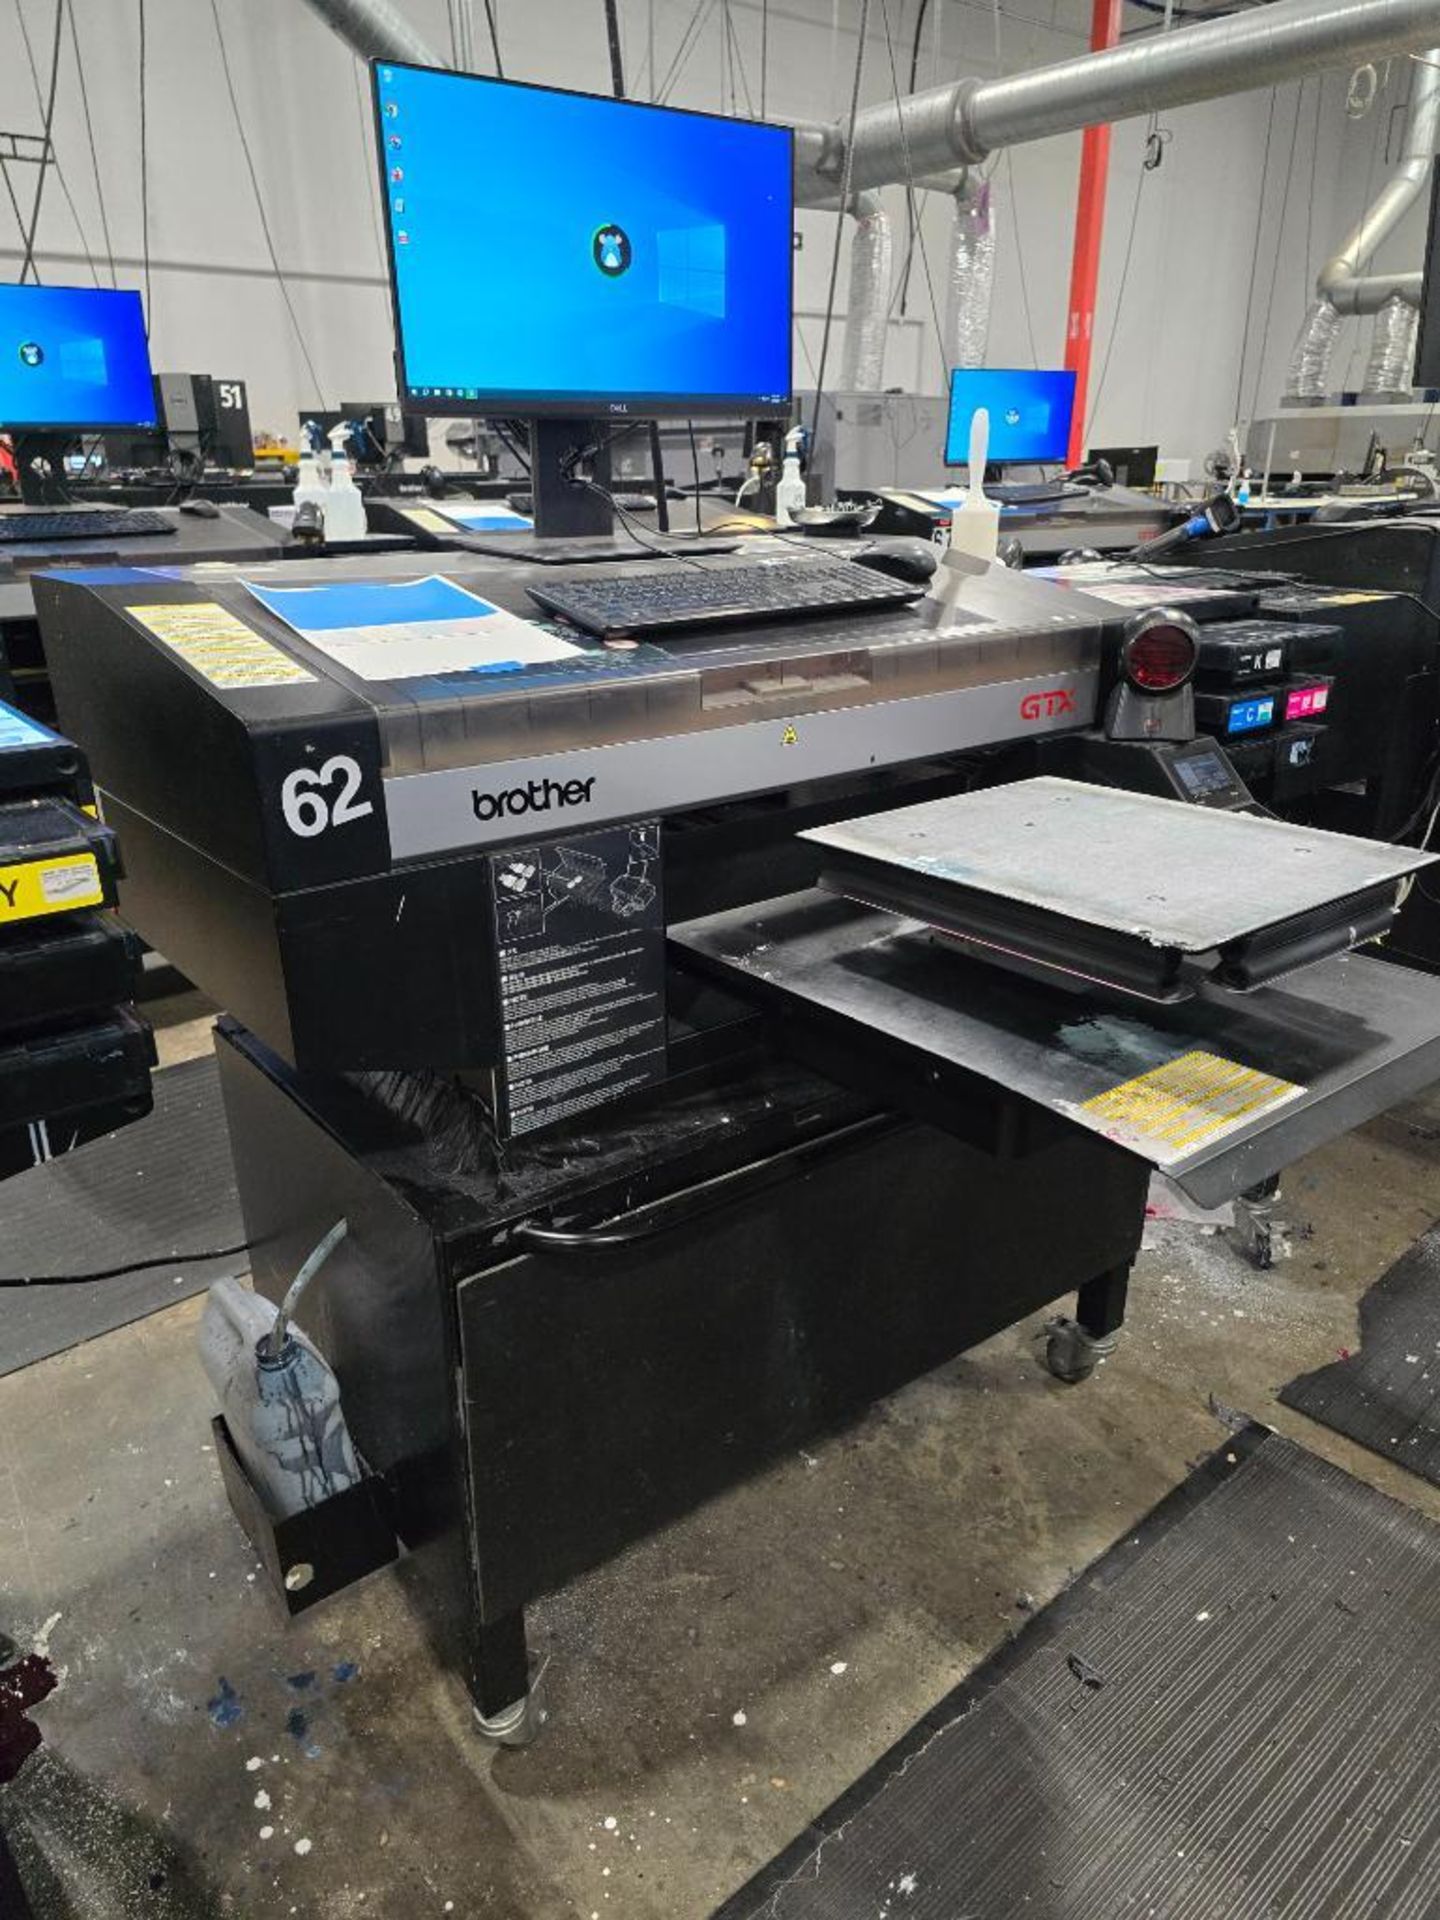 2018 Brother GTX-422 DTG (Direct to Garment) Printer, Twin Head, 6-Color, Textile & Water Based Pigm - Bild 2 aus 9